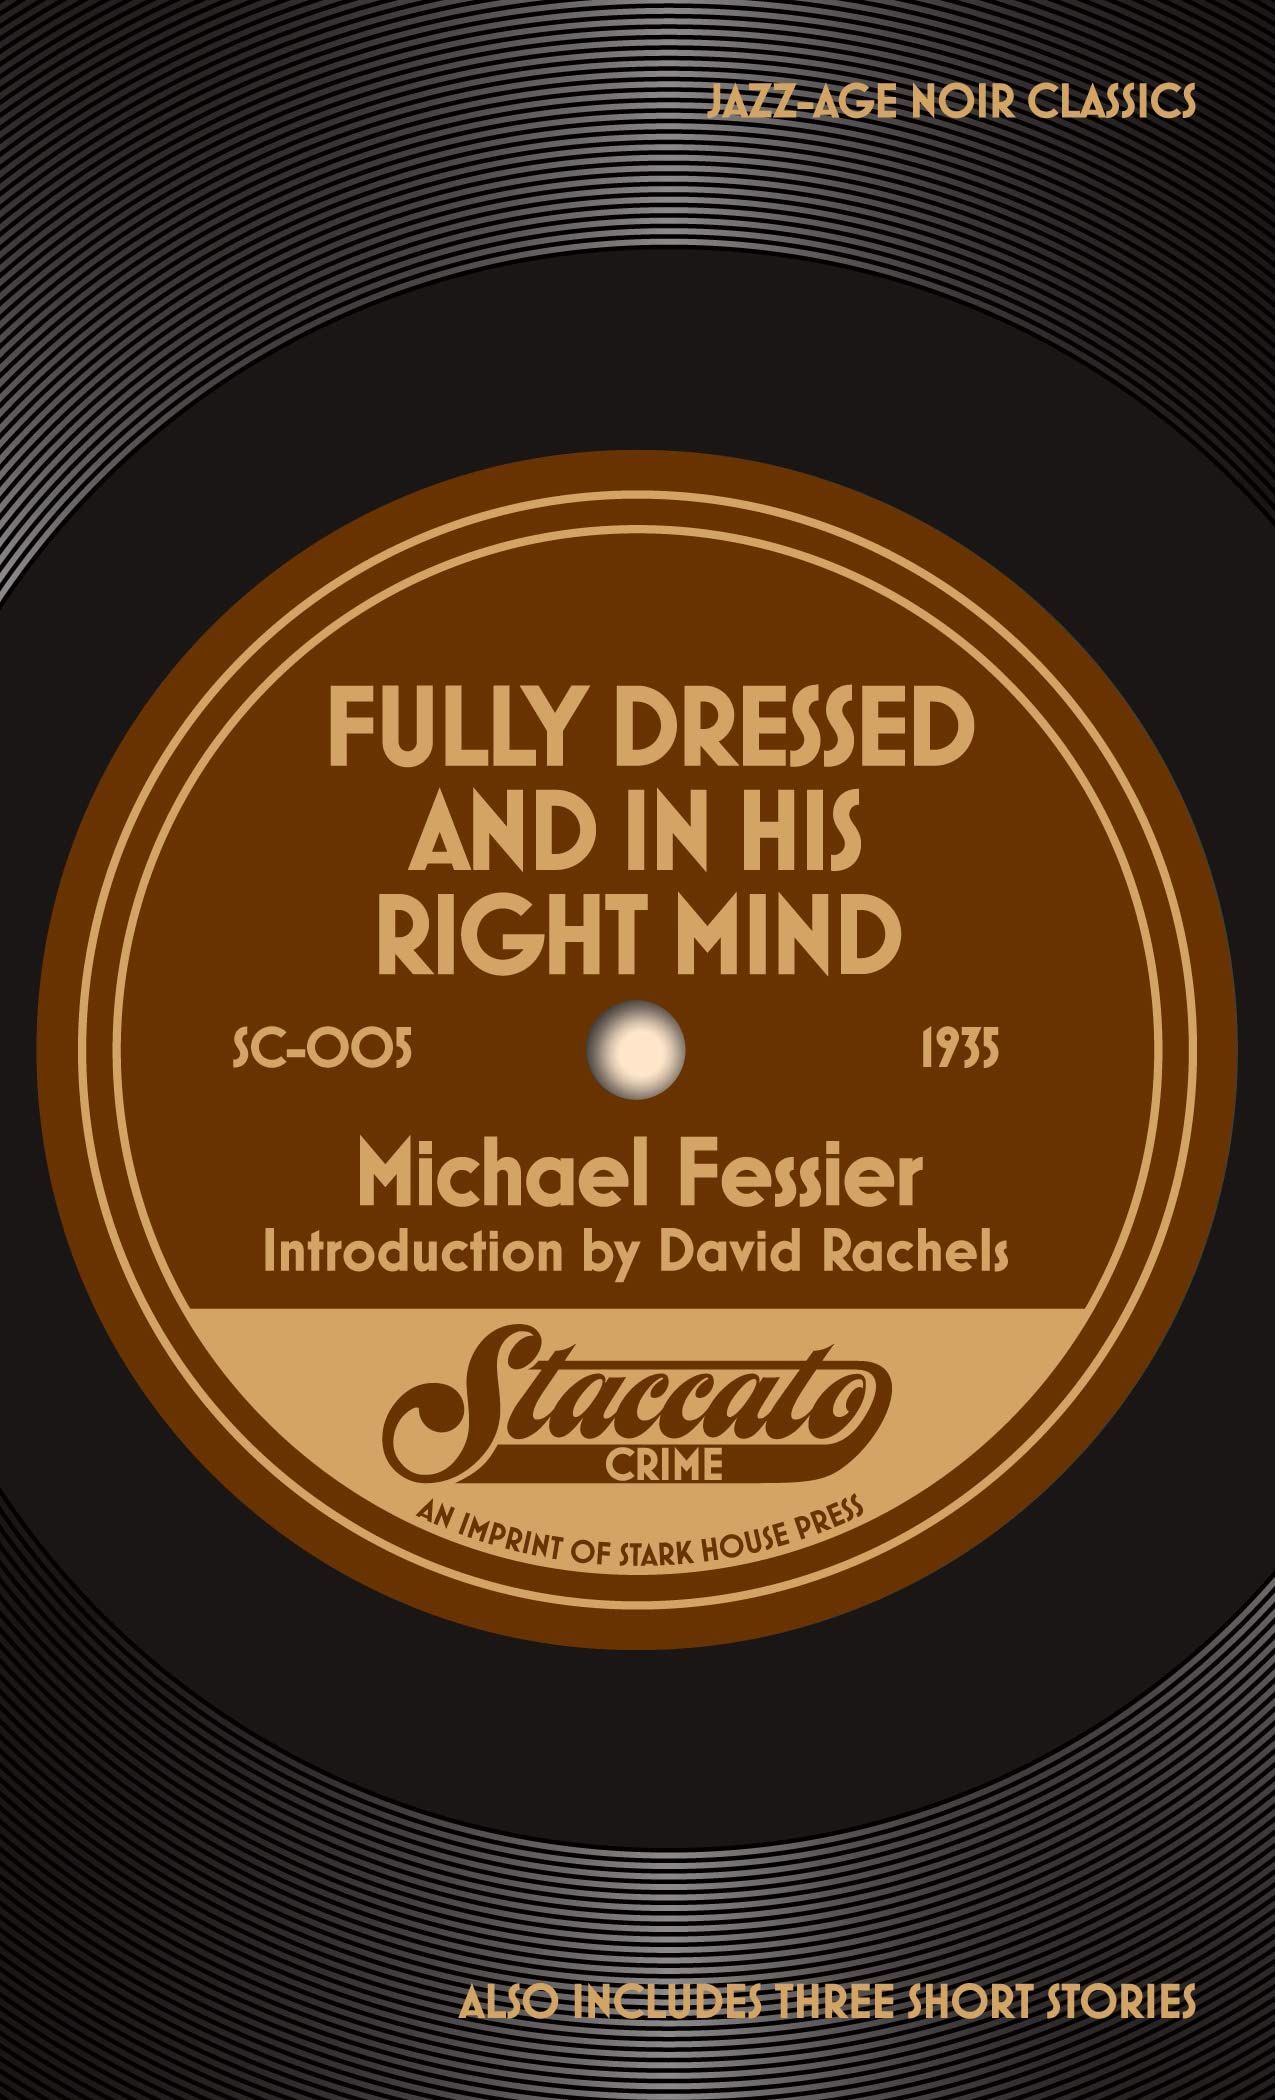 Magical Realism Meets Noir: On Michael Fessier’s “Fully Dressed and in His Right Mind”